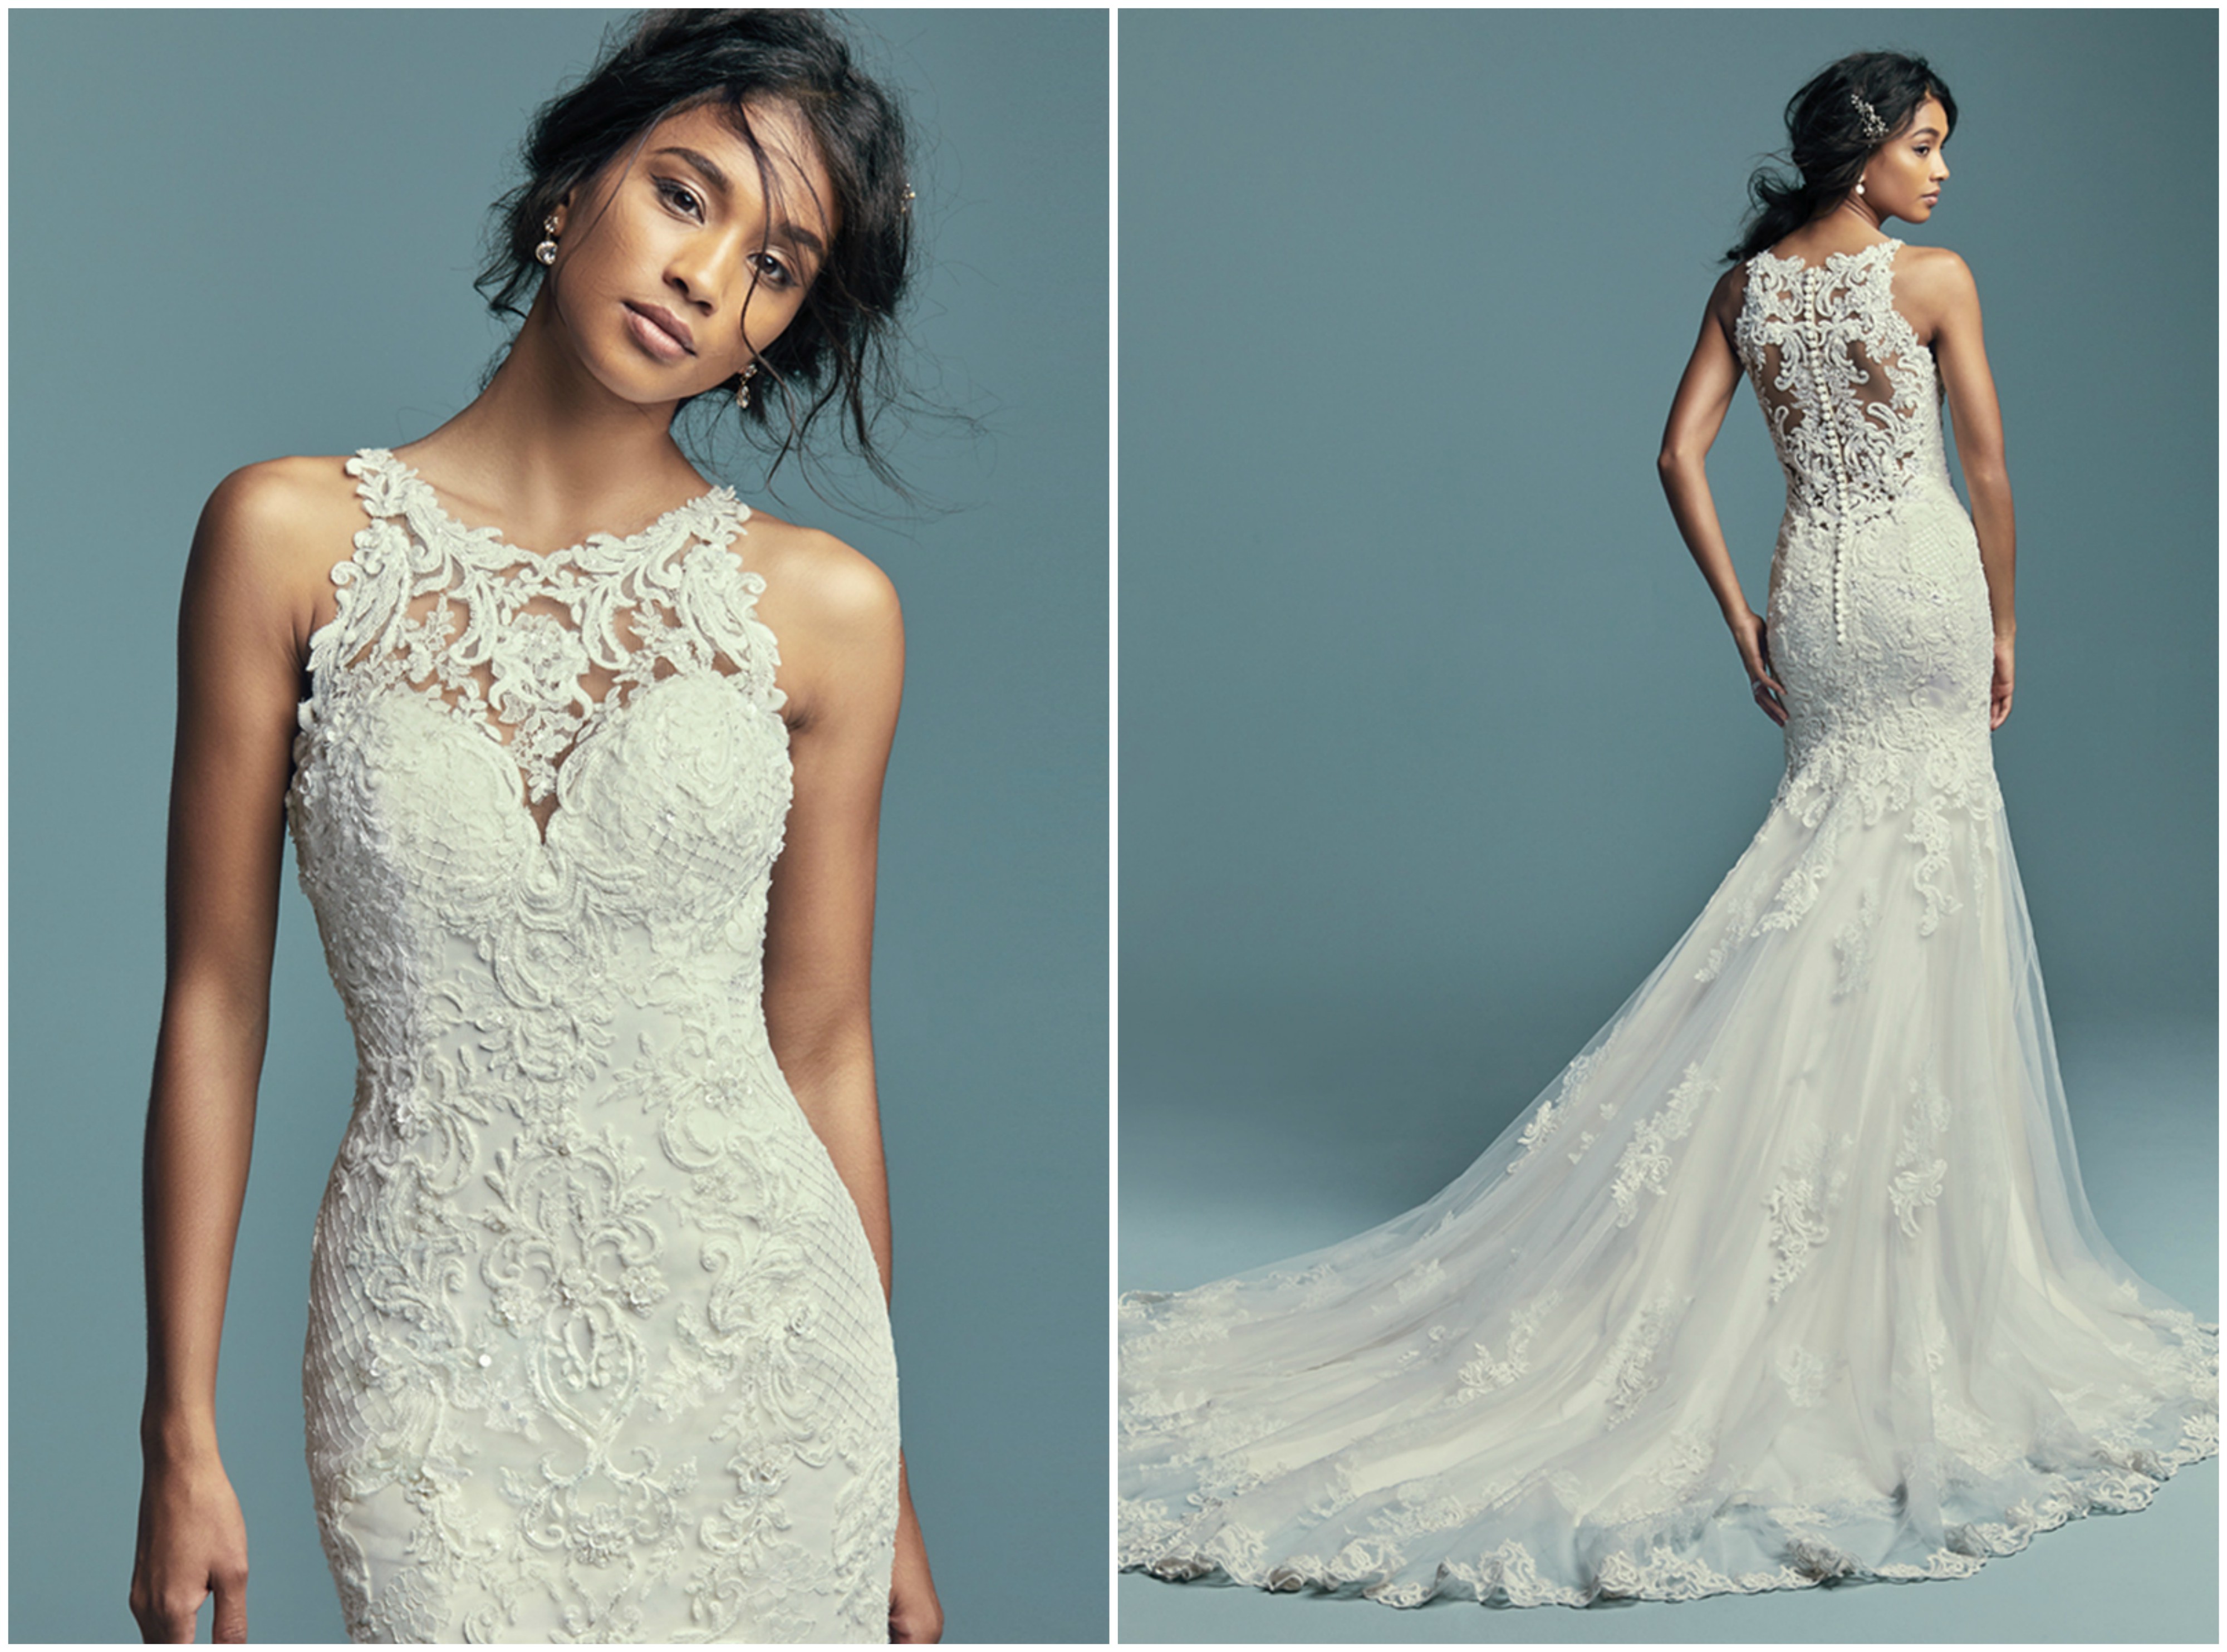 <a href="https://www.maggiesottero.com/maggie-sottero/kendall/11488" target="_blank">Maggie Sottero</a>